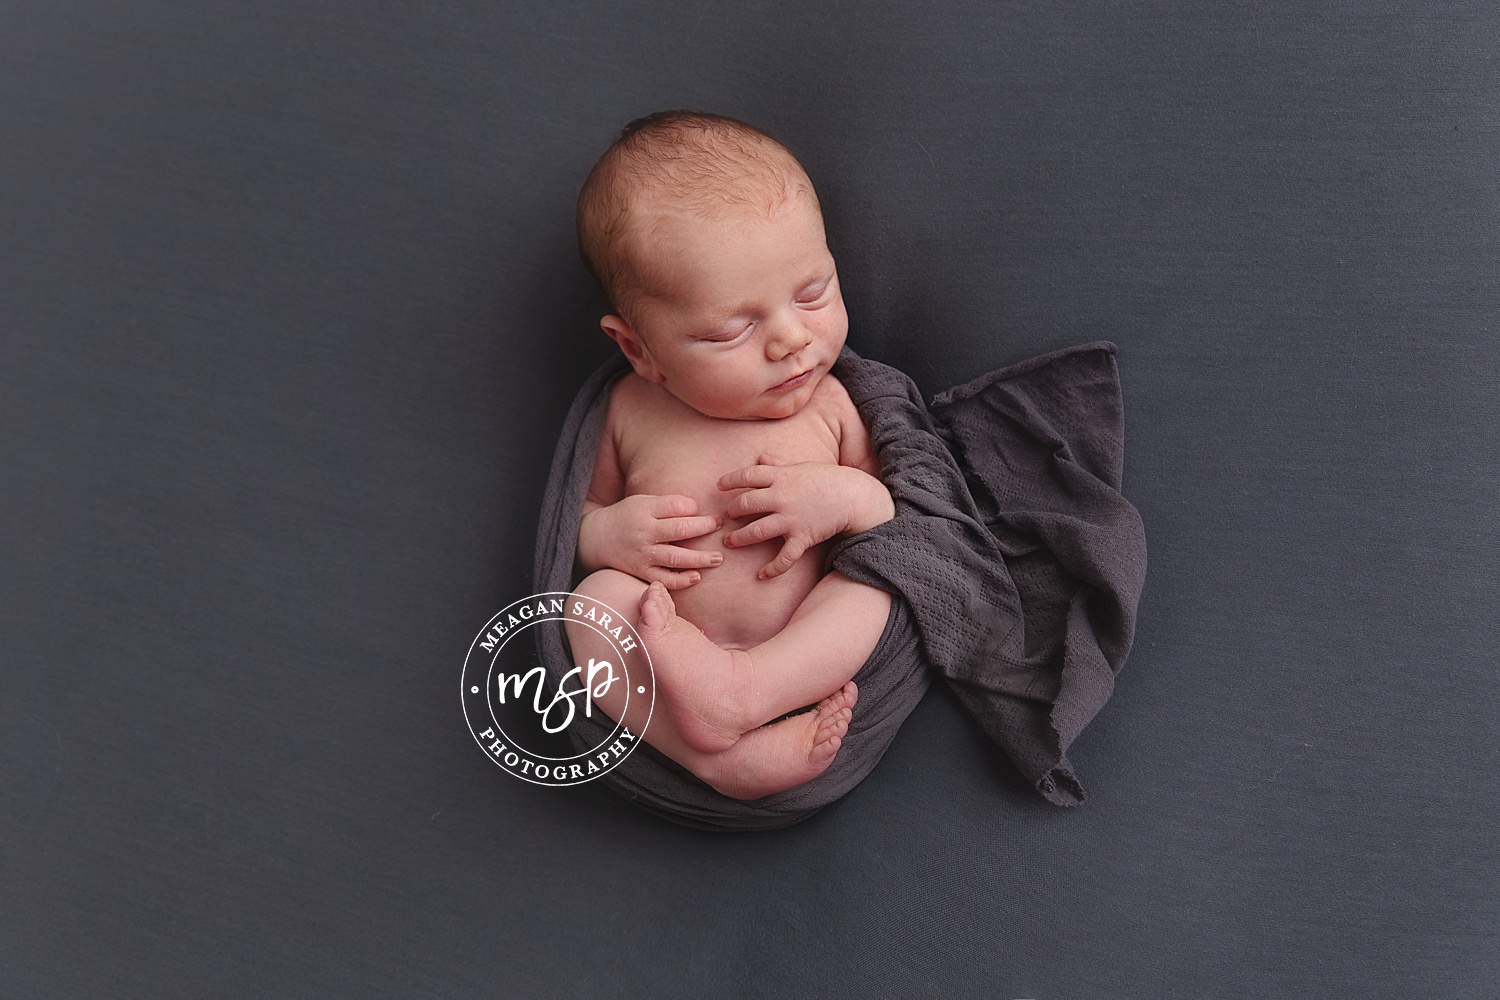 Grey,Boy,Swaddle,Turtle on back,Back,Baby Photographer Leeds,Baby Photography Leeds,Leeds Newborn Photographer,Leeds Newborn Photography,Baby Pictures,Cute babies,Little Ones,Meagan Sarah Photography,Newborn Photography,Professional Photographer in Leeds,West Yorkshire Photographer,Yorkshire Newborn Photographer,Yorkshire Newborn Photography,